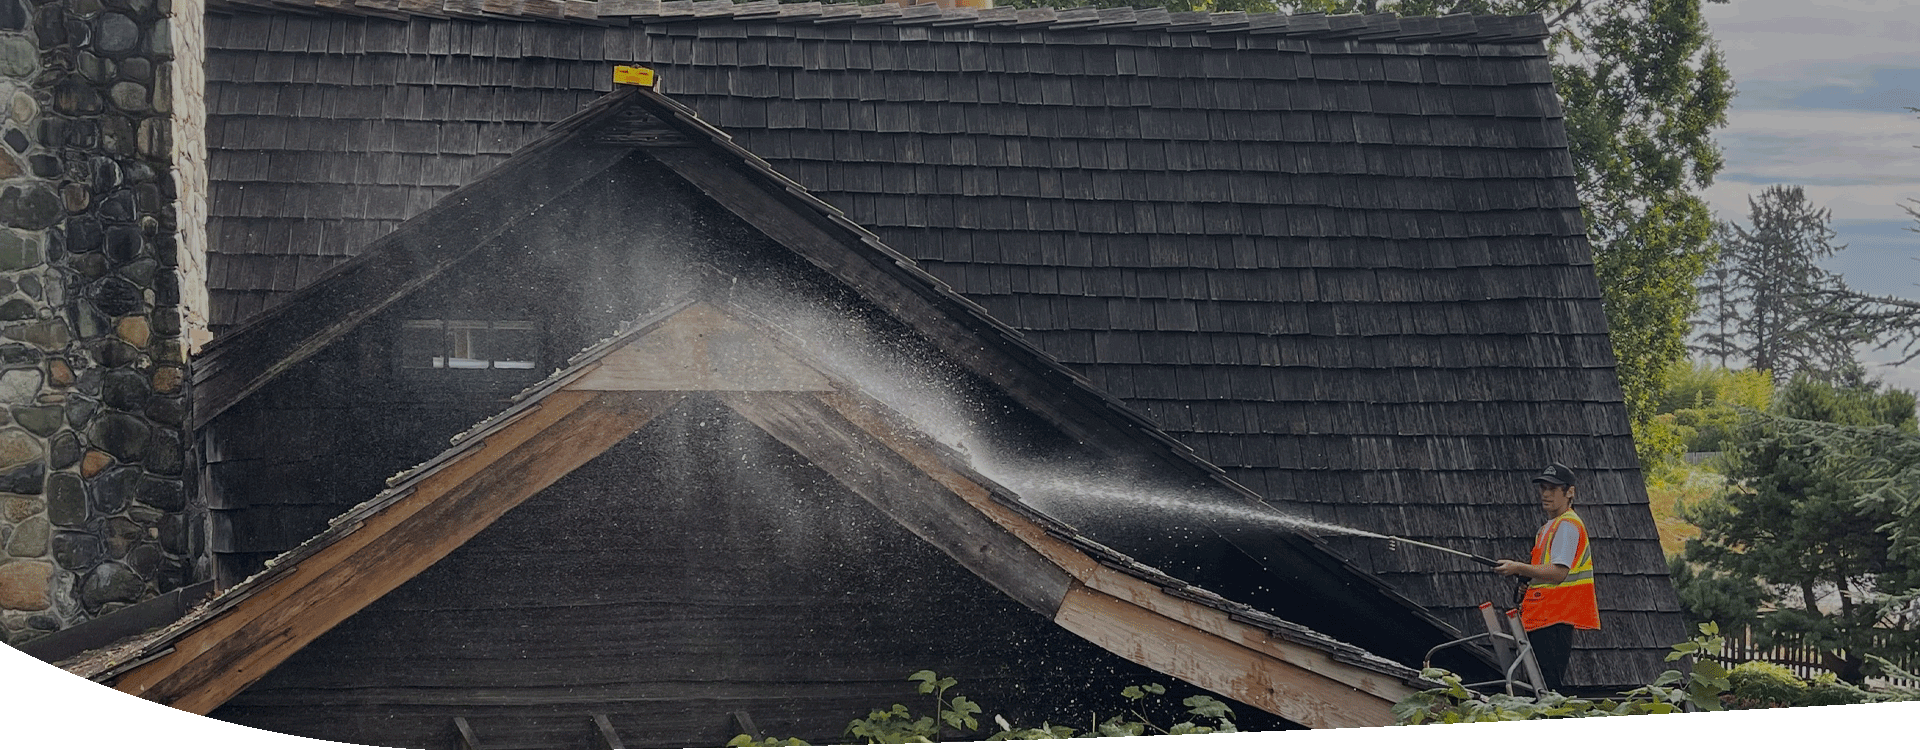 Roof Washing by a Skilled Worker